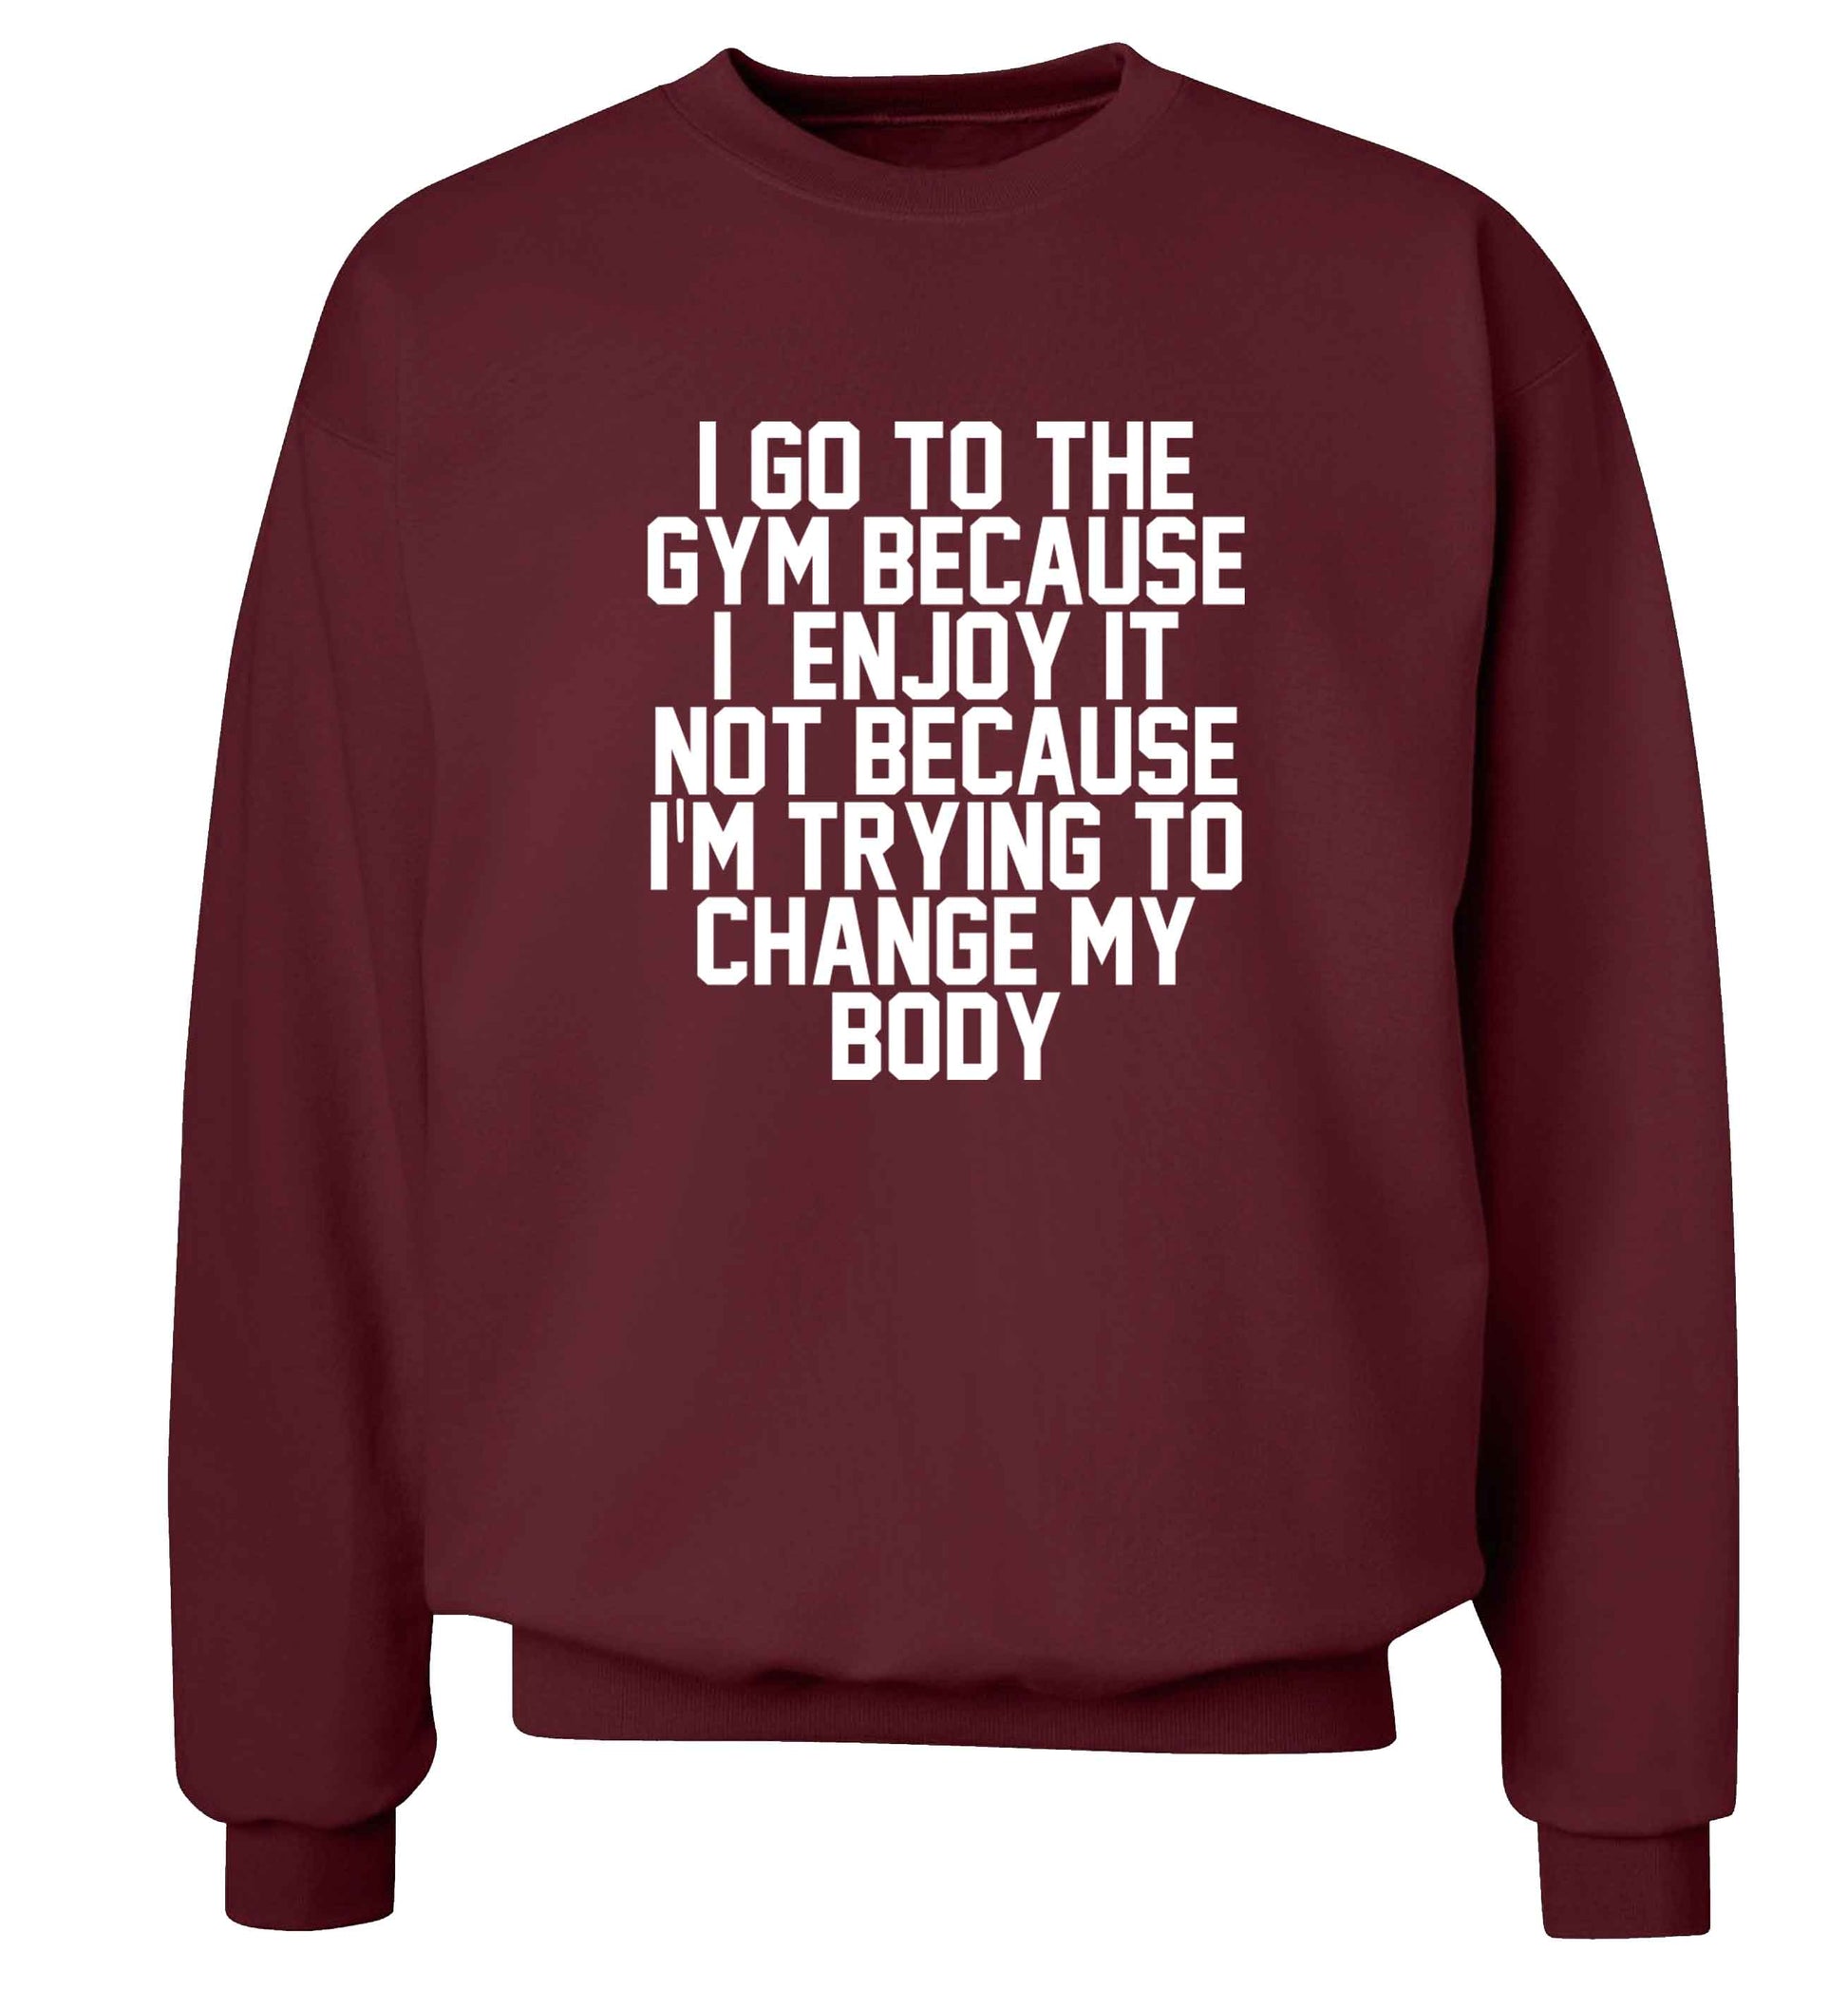 I go to the gym because I enjoy it not because I'm trying to change my body adult's unisex maroon sweater 2XL